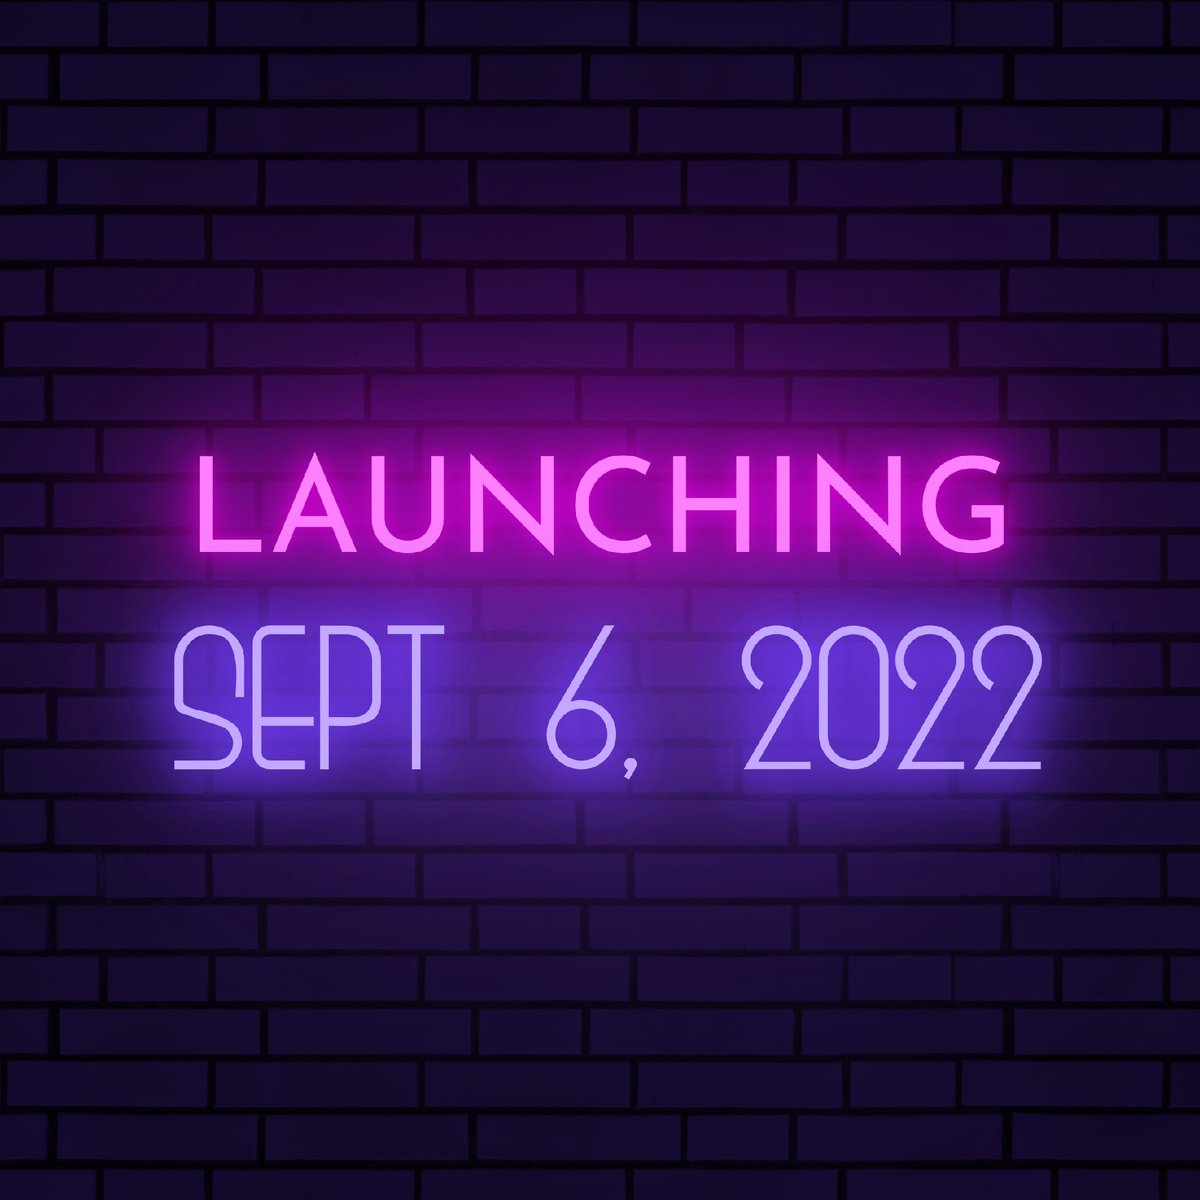 The Cyber Queens Podcast first episode drops Sept 6, 2022. cyberqueenspodcast.com to stay updated!

#podcast #cyberpodcast #cybersecurity #infosec #womenintech #womenincyber #womeninsecurity #hacker #ethicalhacker #hackergirl #womenwhohack #genz #millennial #genzpodcast